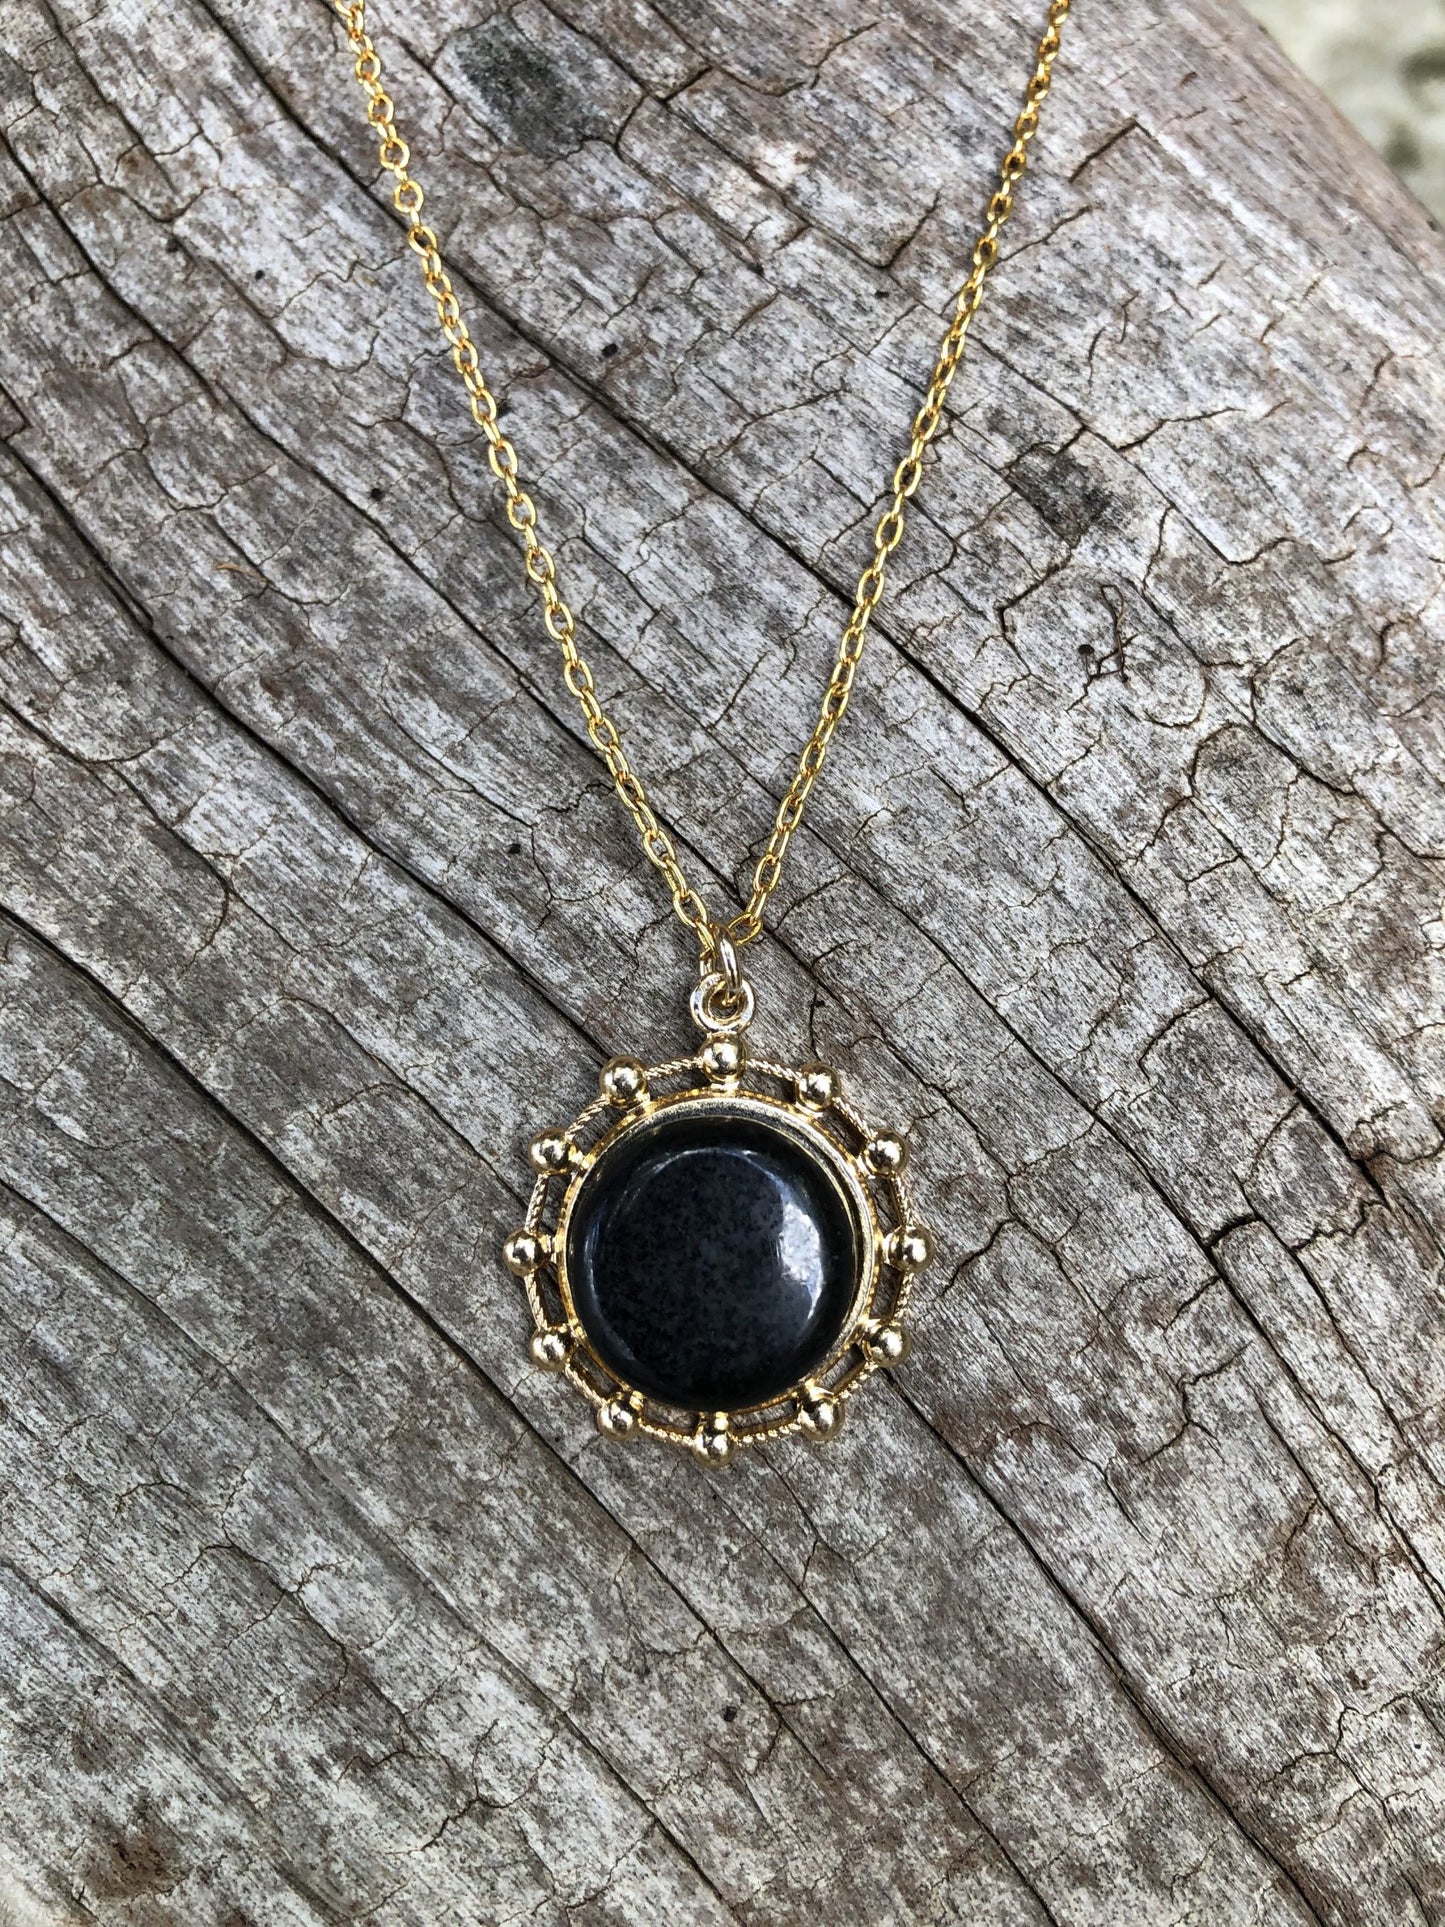 Necklace of black granite, hand polished to a 15mm disk and mounted on a gold plated setting with 19 inch chain